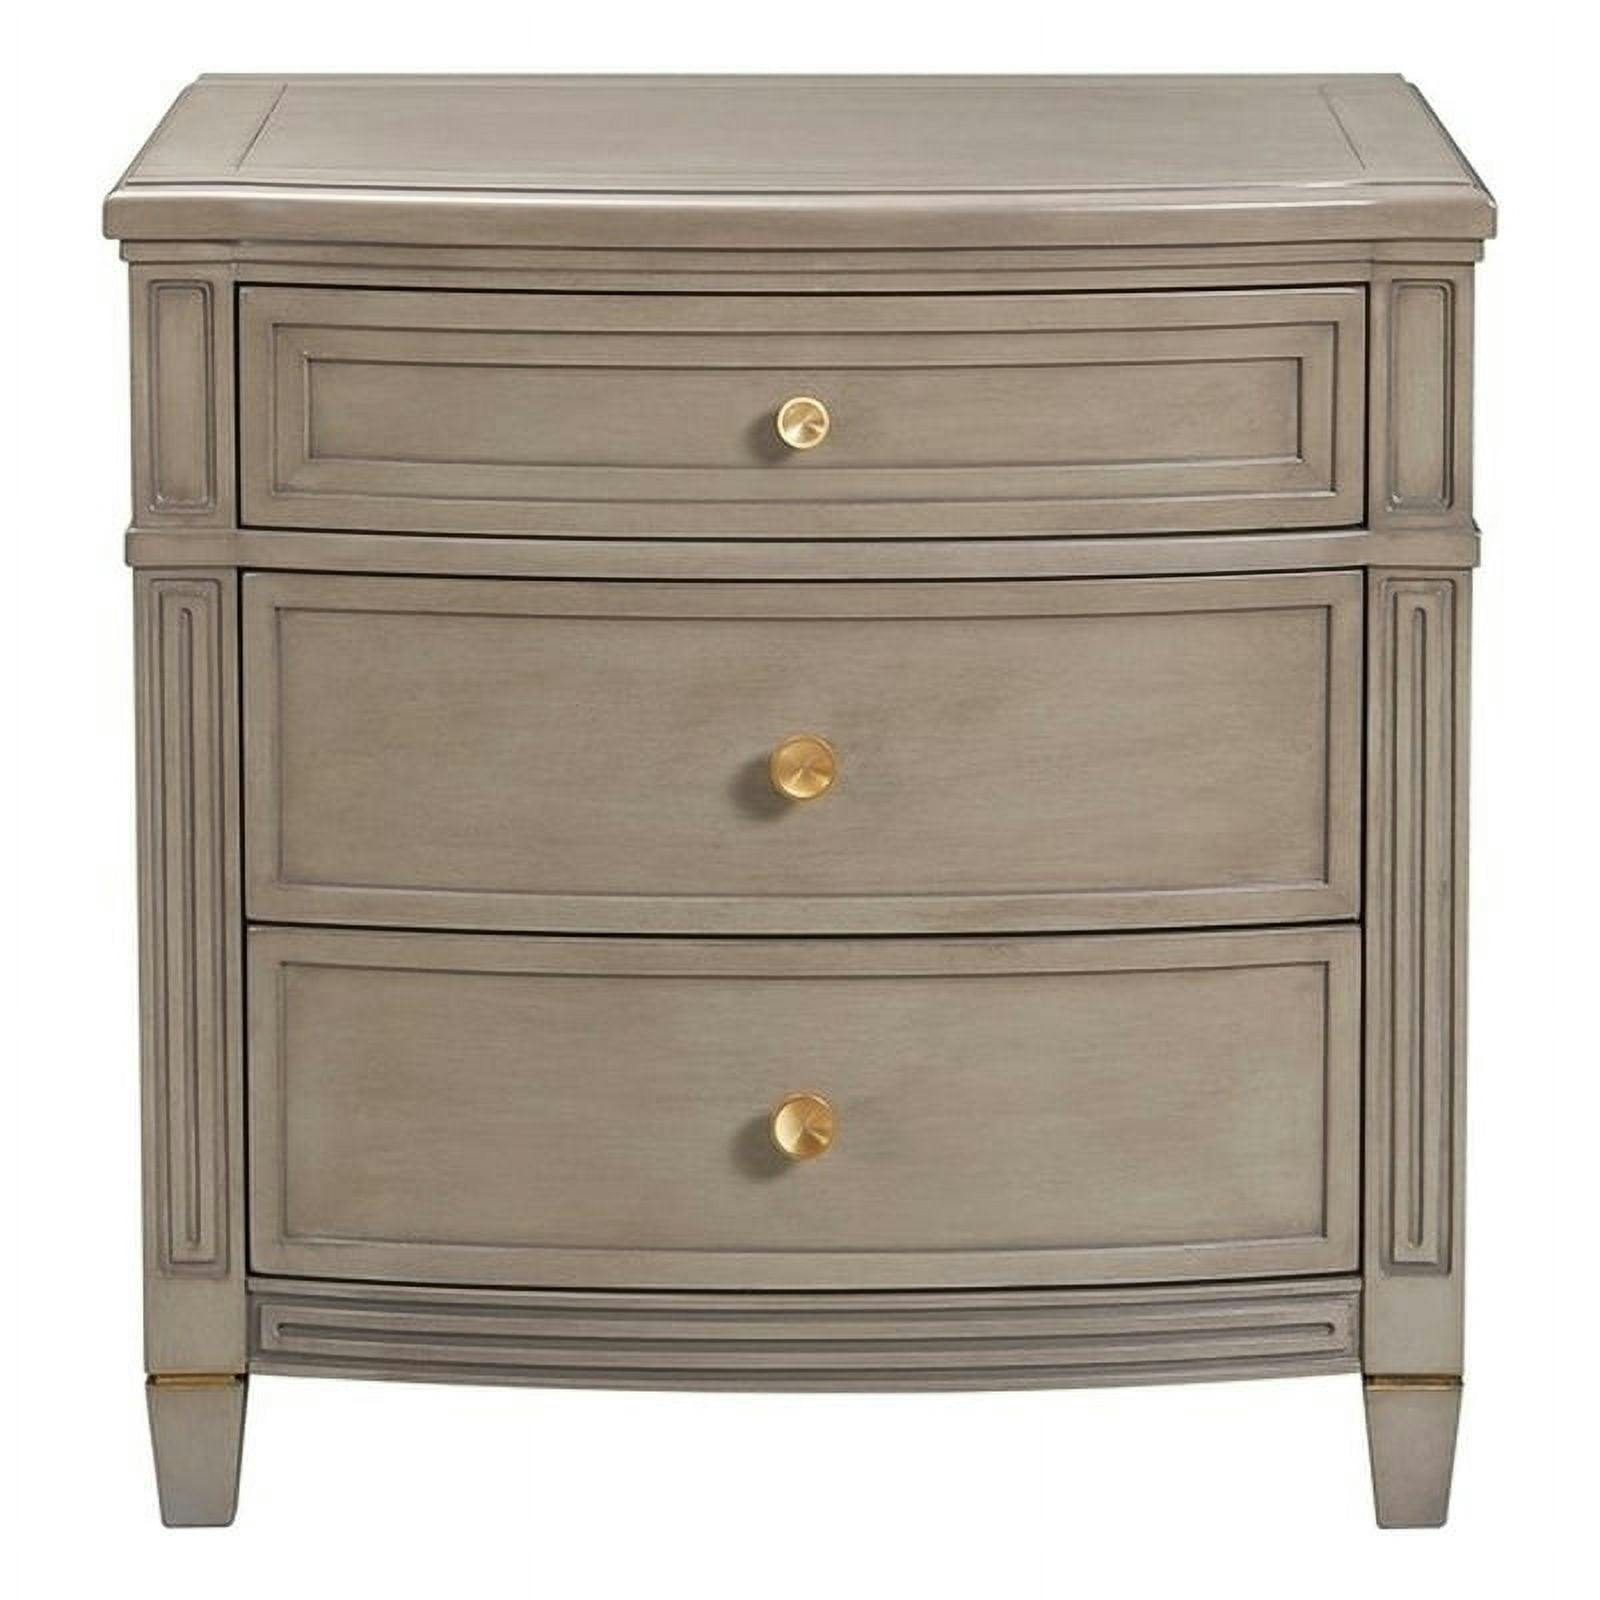 Dauphin Grey Cashmere 3-Drawer Nightstand with Gold Accents